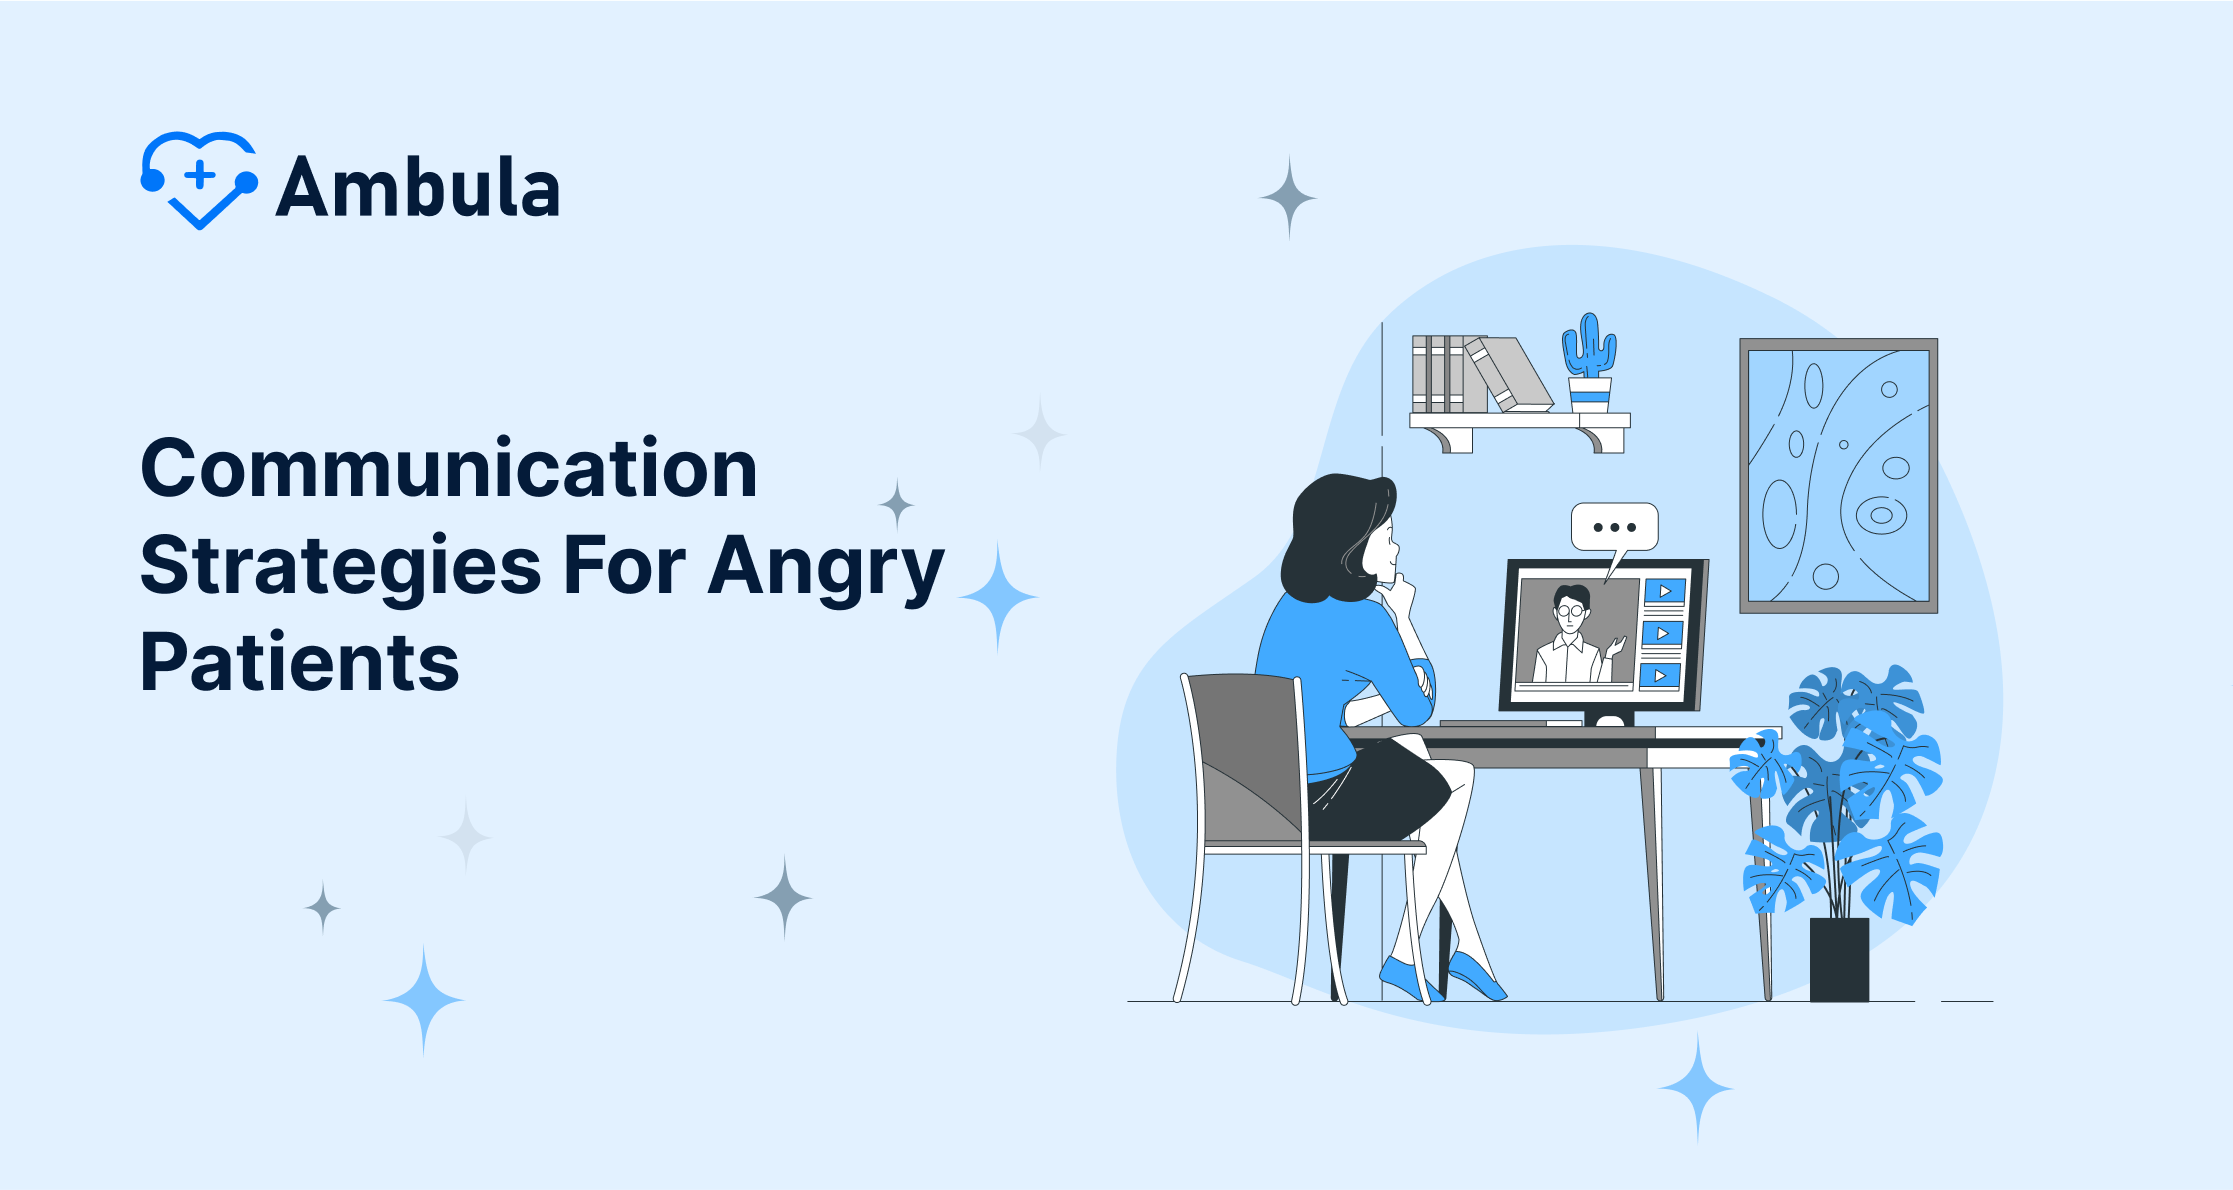 Communication Strategies For Angry Patients